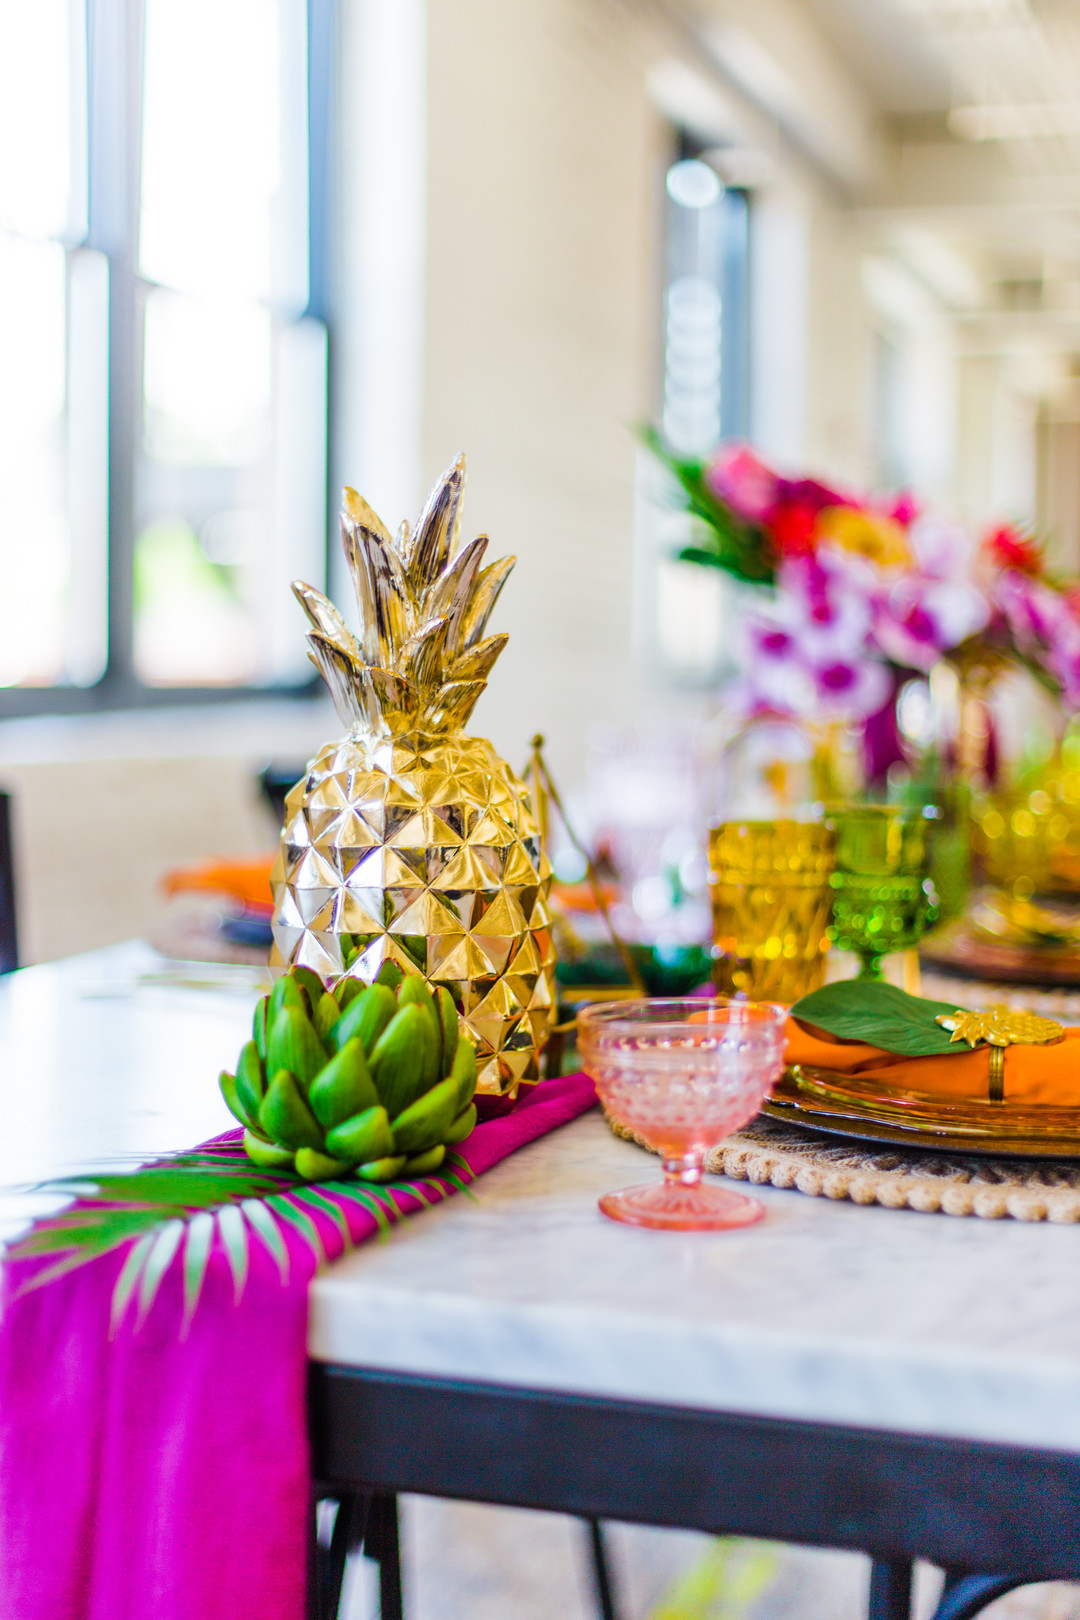 Pineapple wedding table decor: Tropical Eclectic Wedding Inspiration captured by Grace Rios Photography featured on CHI thee WED. See more colorful wedding ideas at CHItheeWED.com!